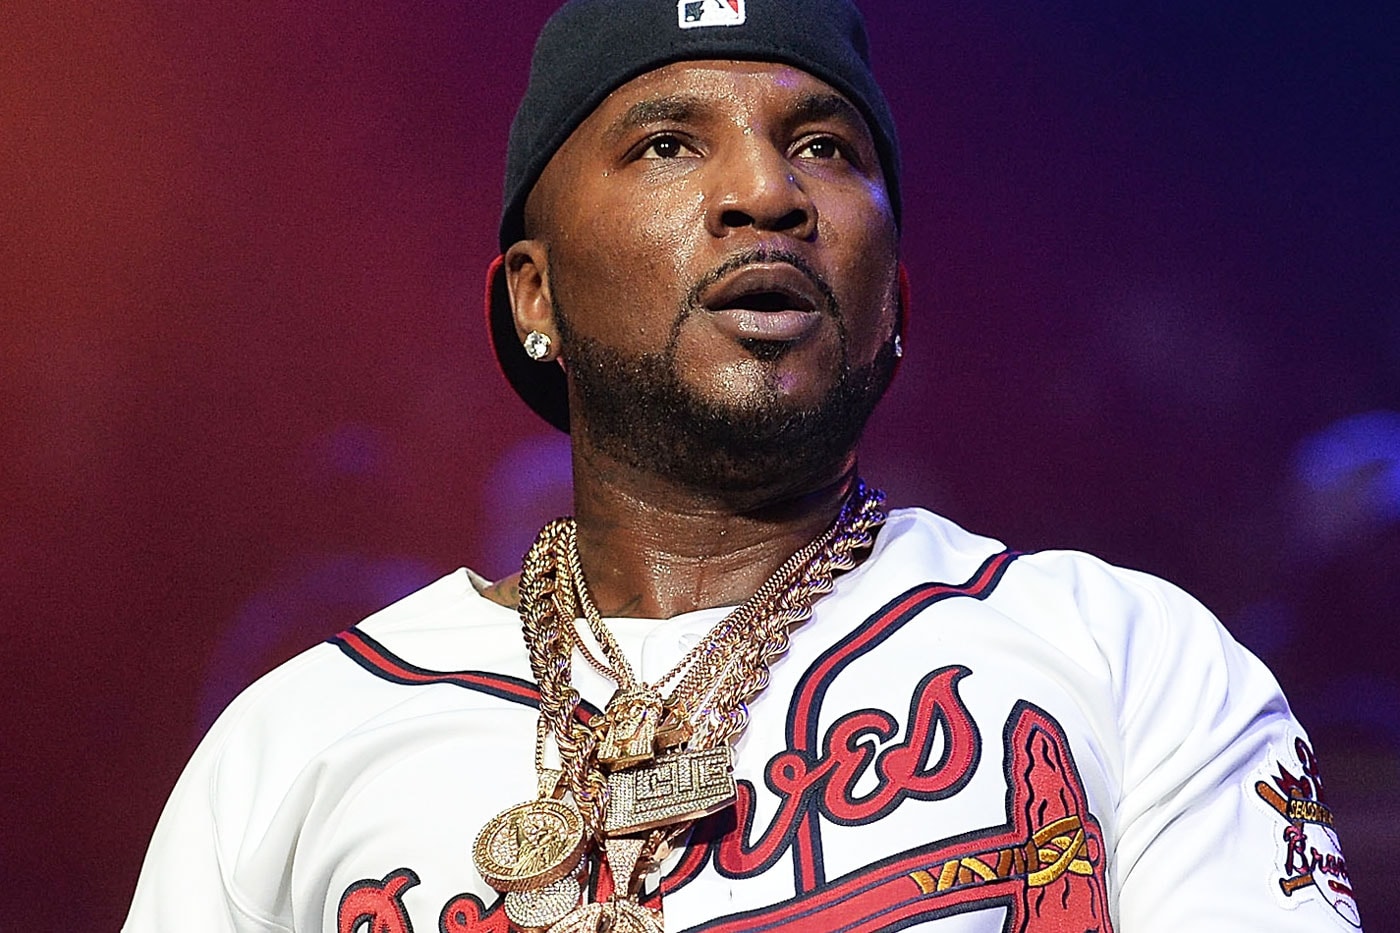 Jeezy Releases "Politically Correct"